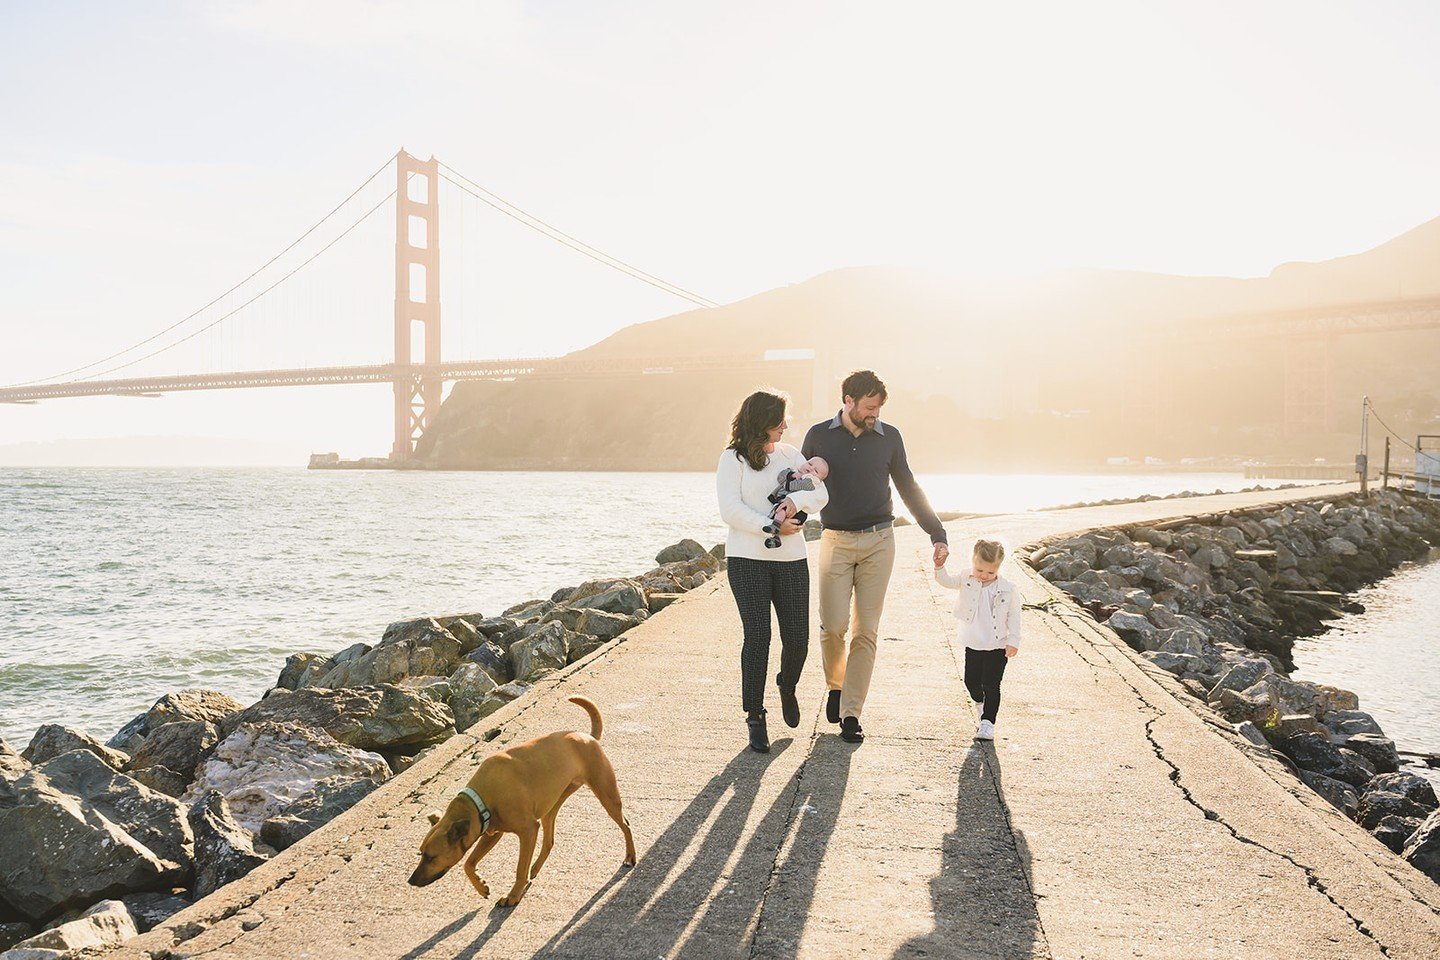 The #GoldenGateBridge is always a beautiful backdrop! Absolutely loved shooting this family with their sweet newest addition.